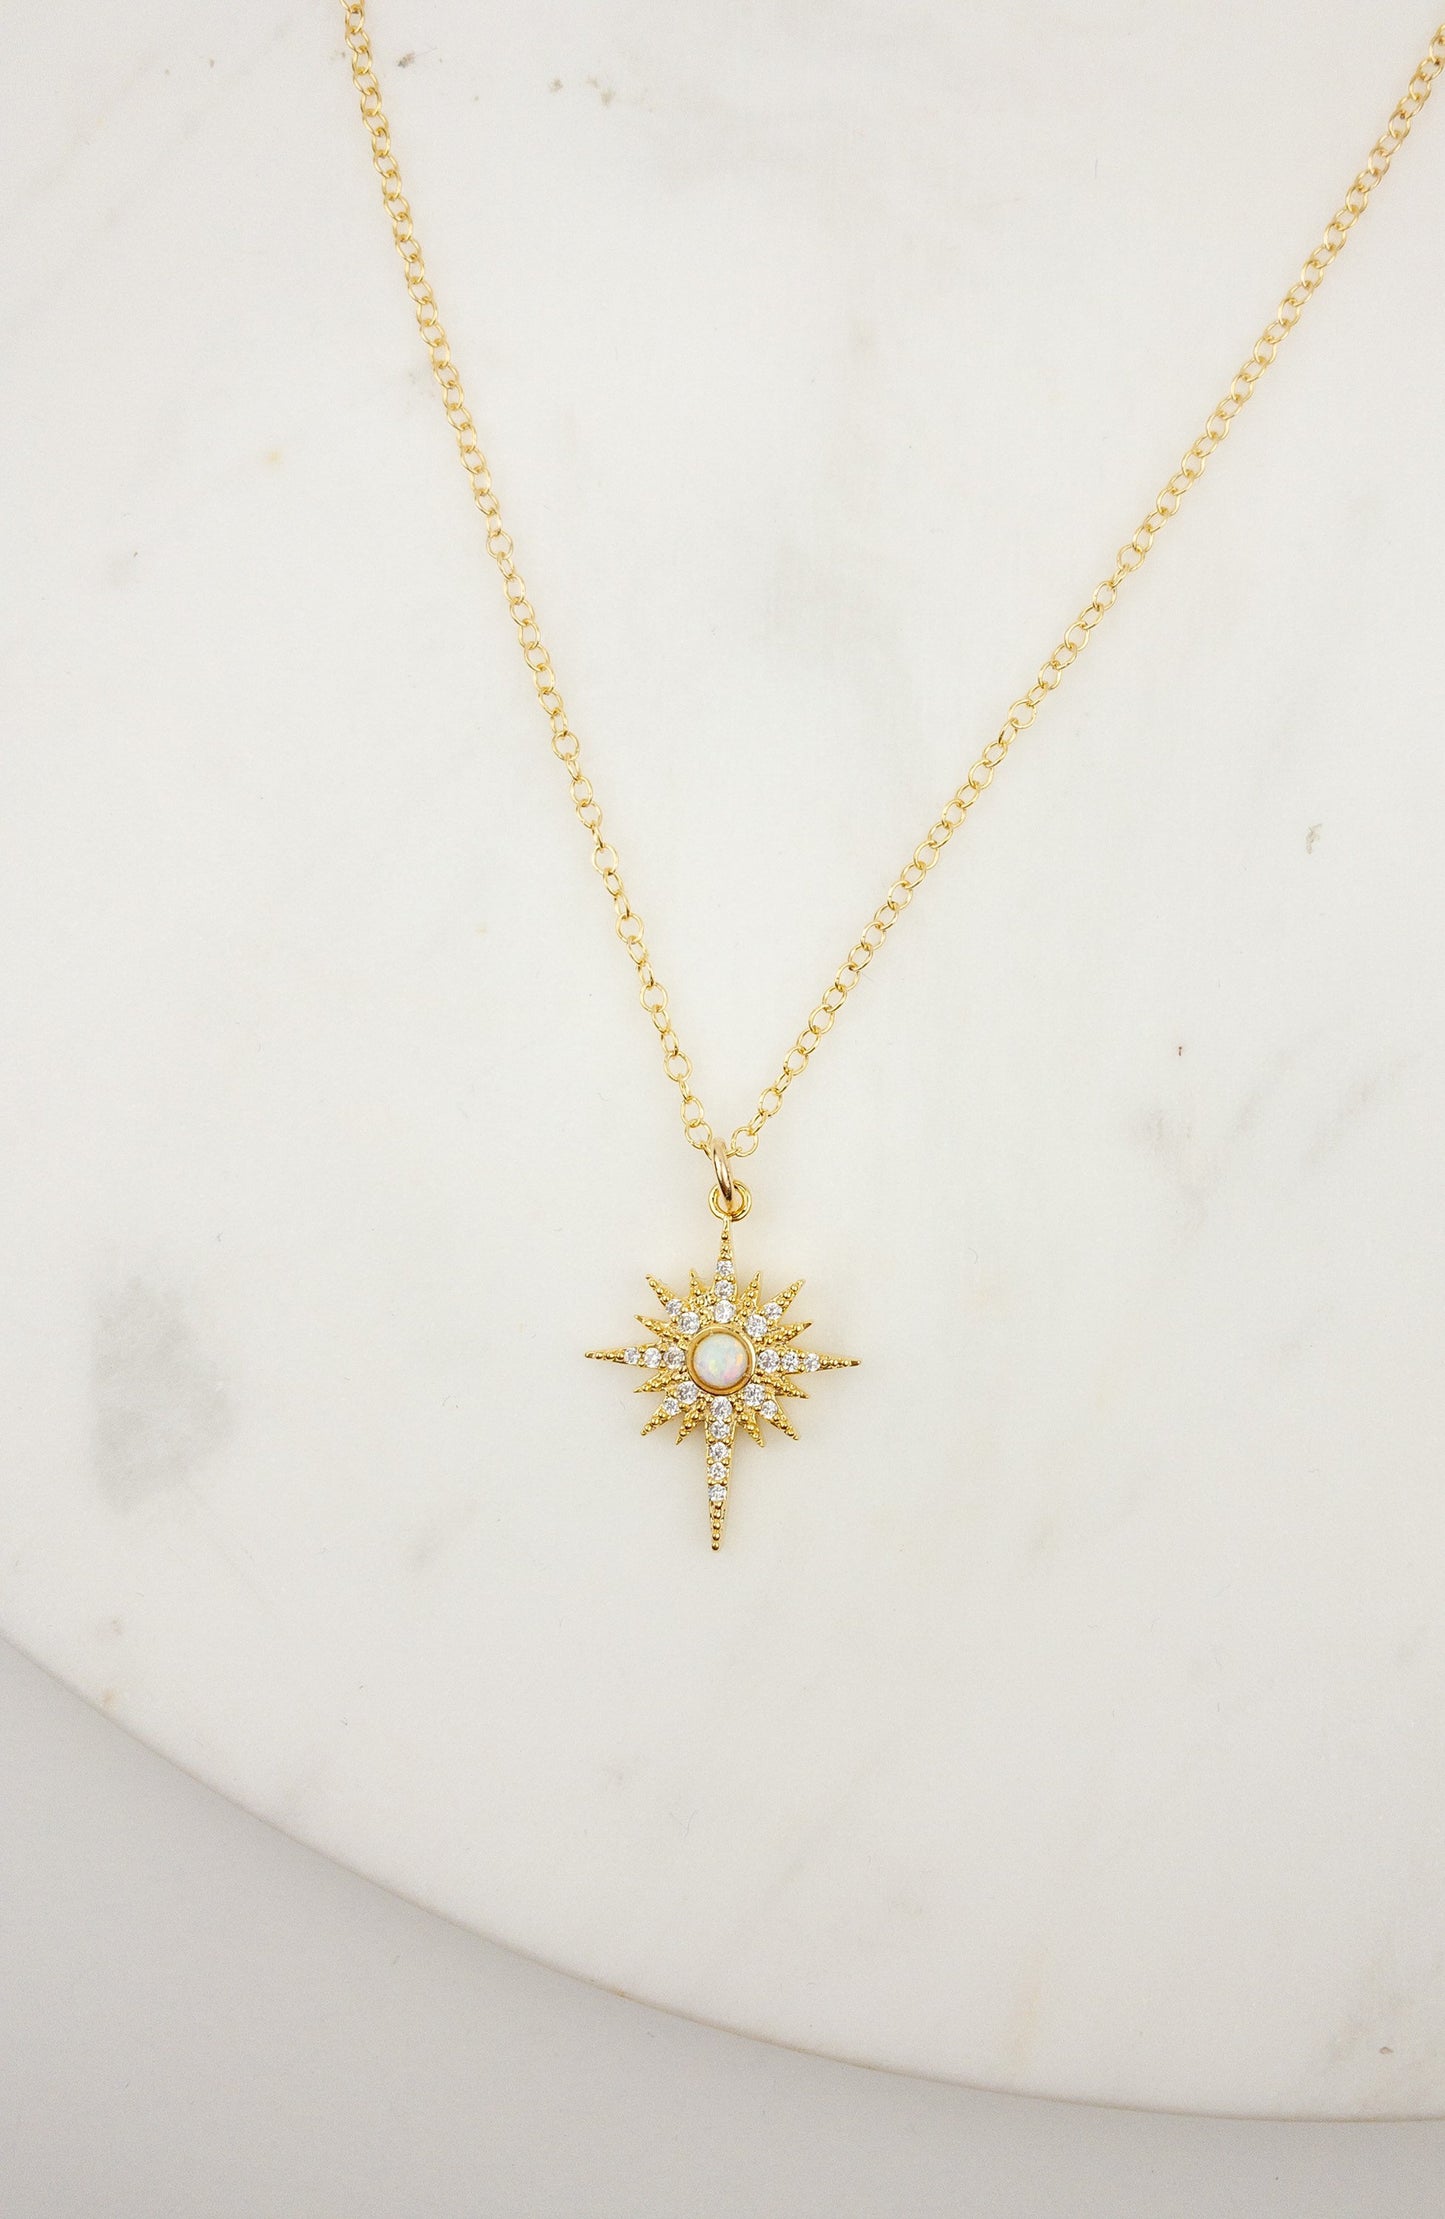 Gold opal star necklace